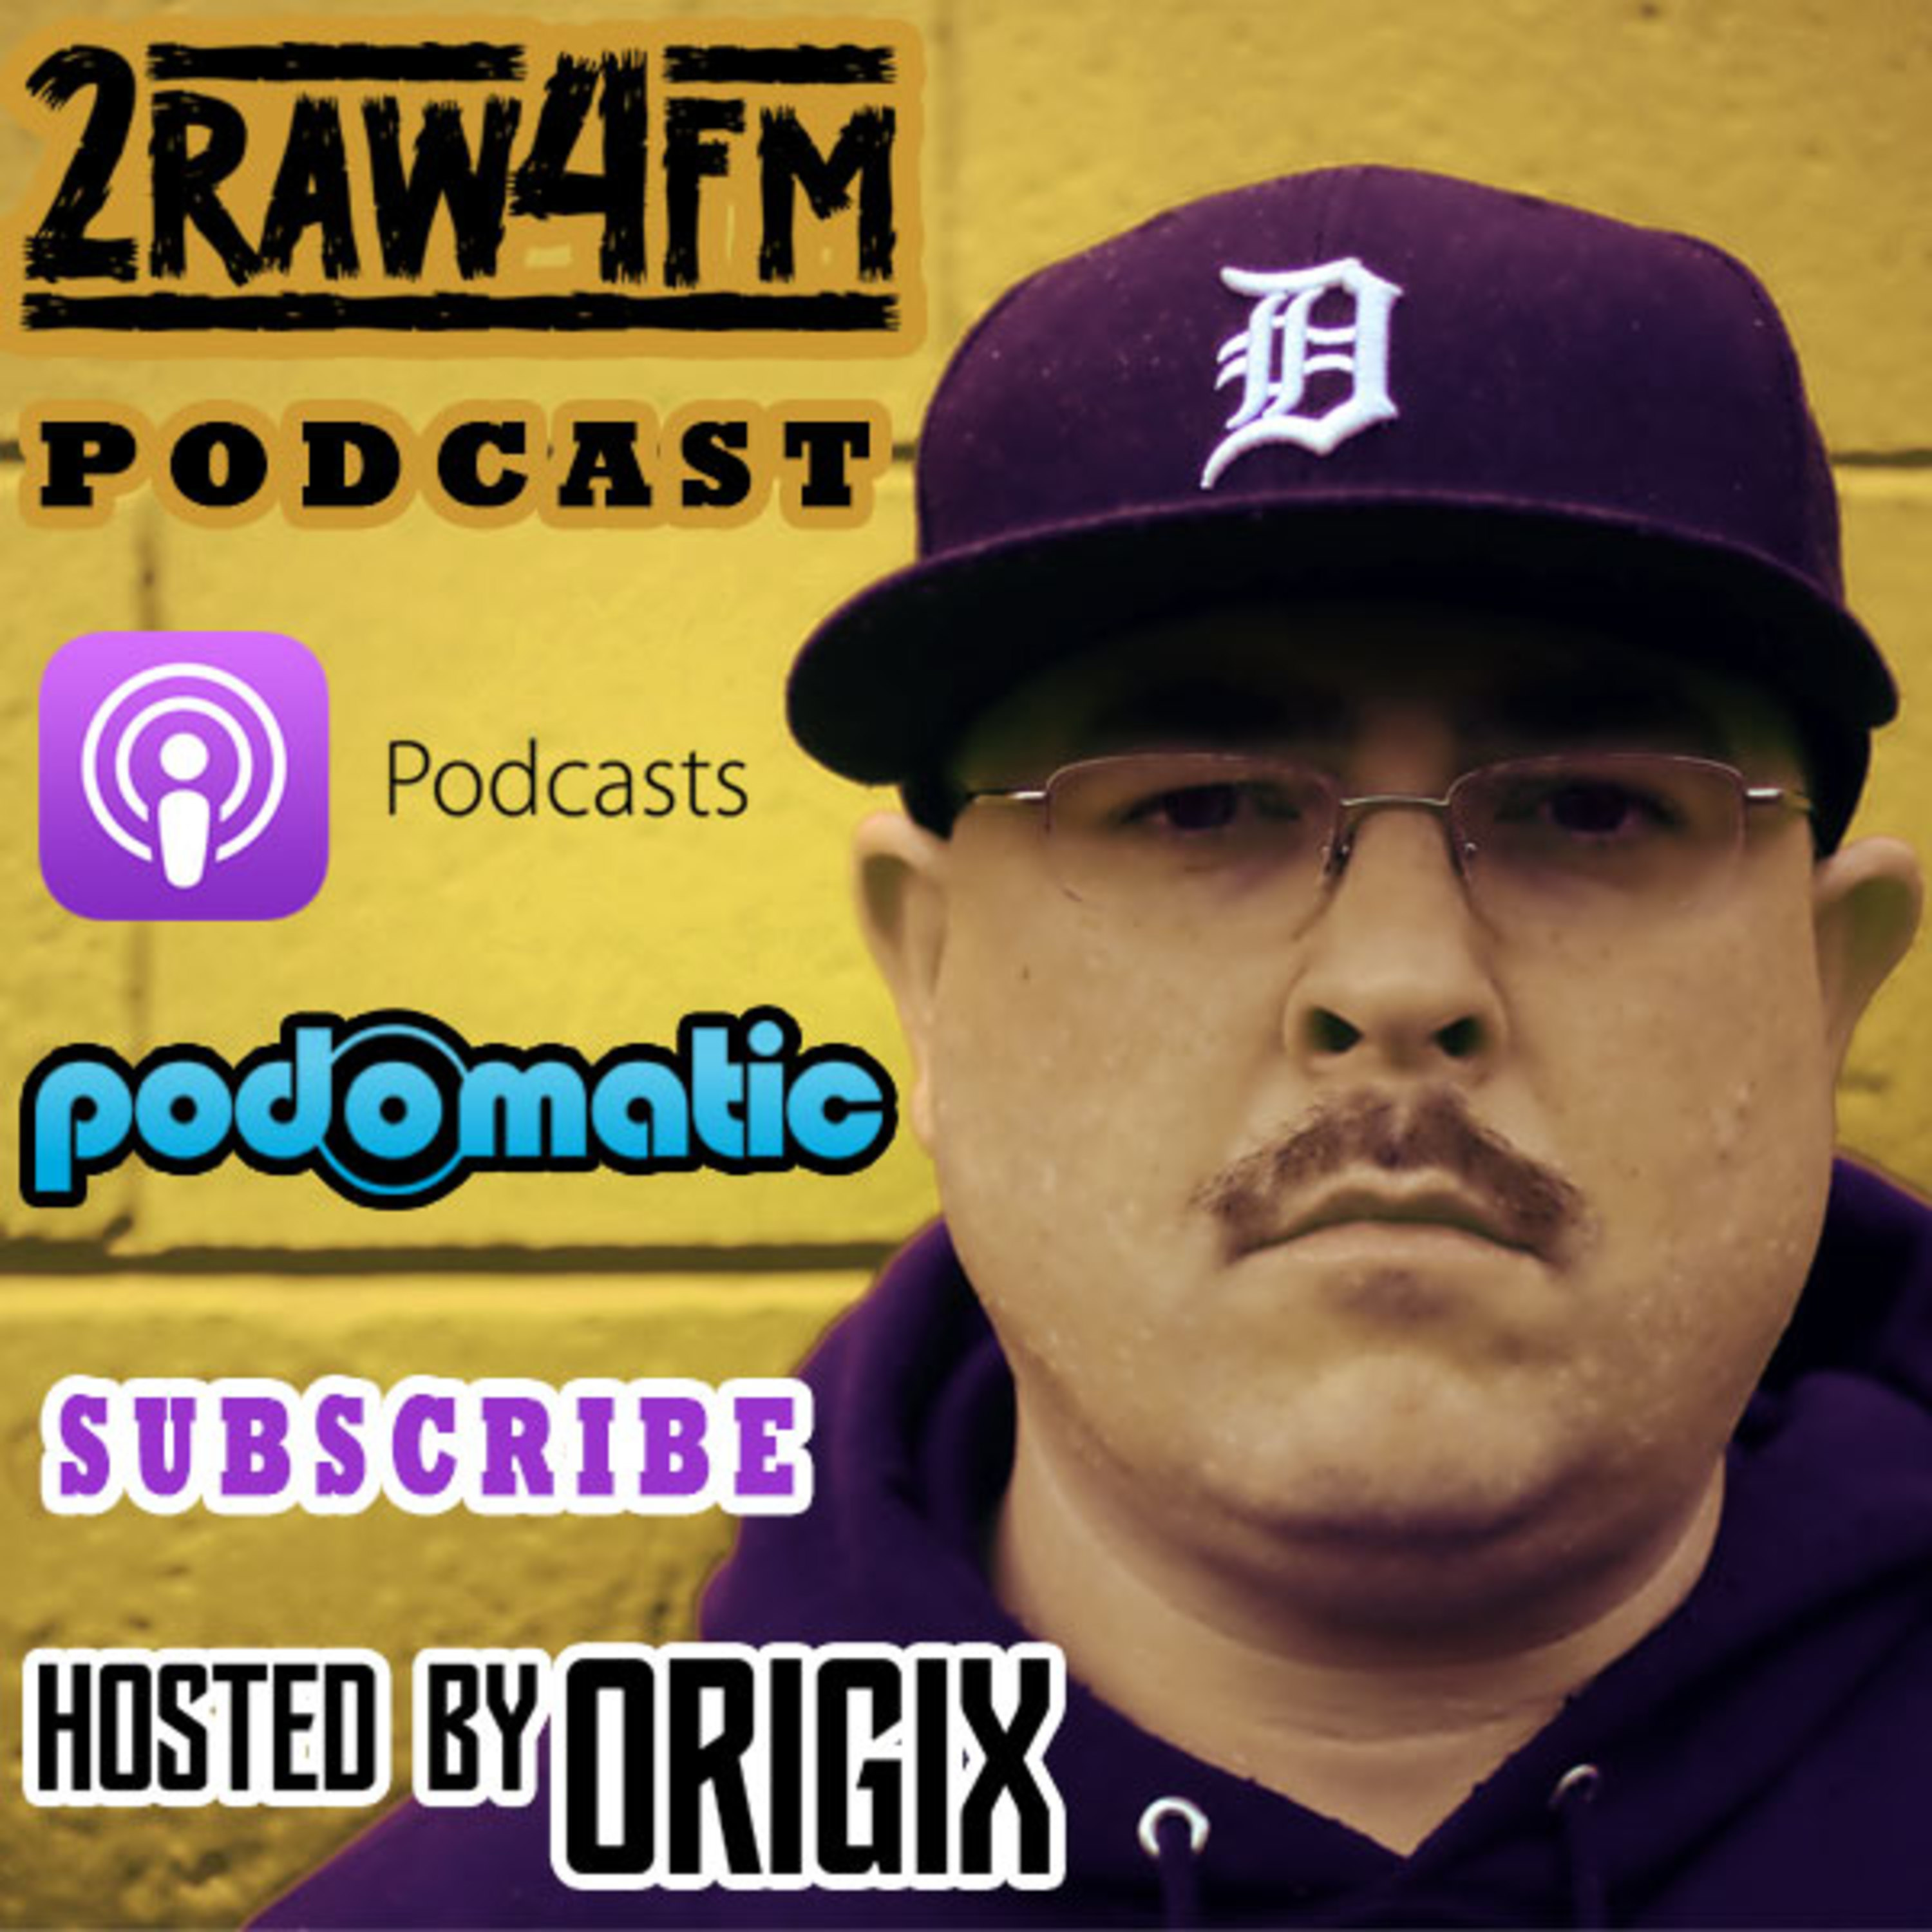 2RAW4FM PODCAST HOSTED BY ORIGIX